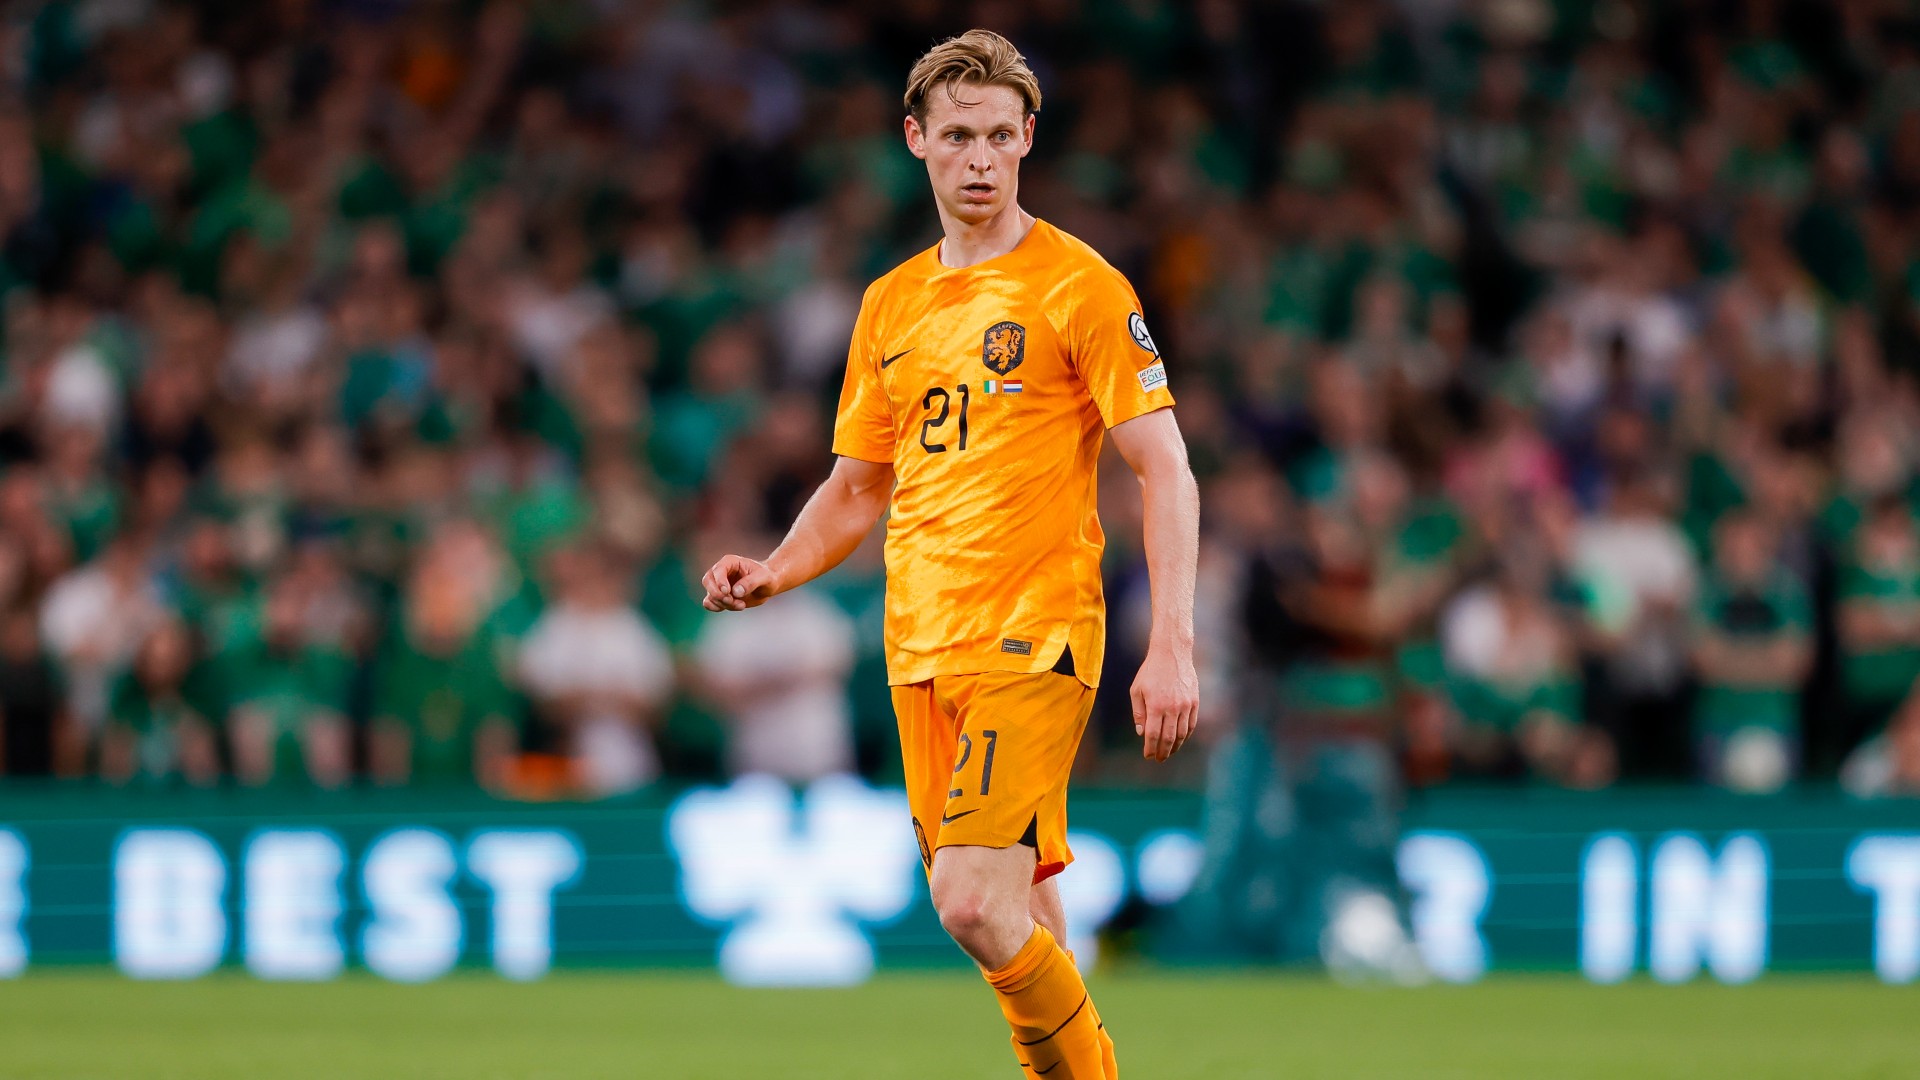 De Jong 'sad' to miss out on Euros